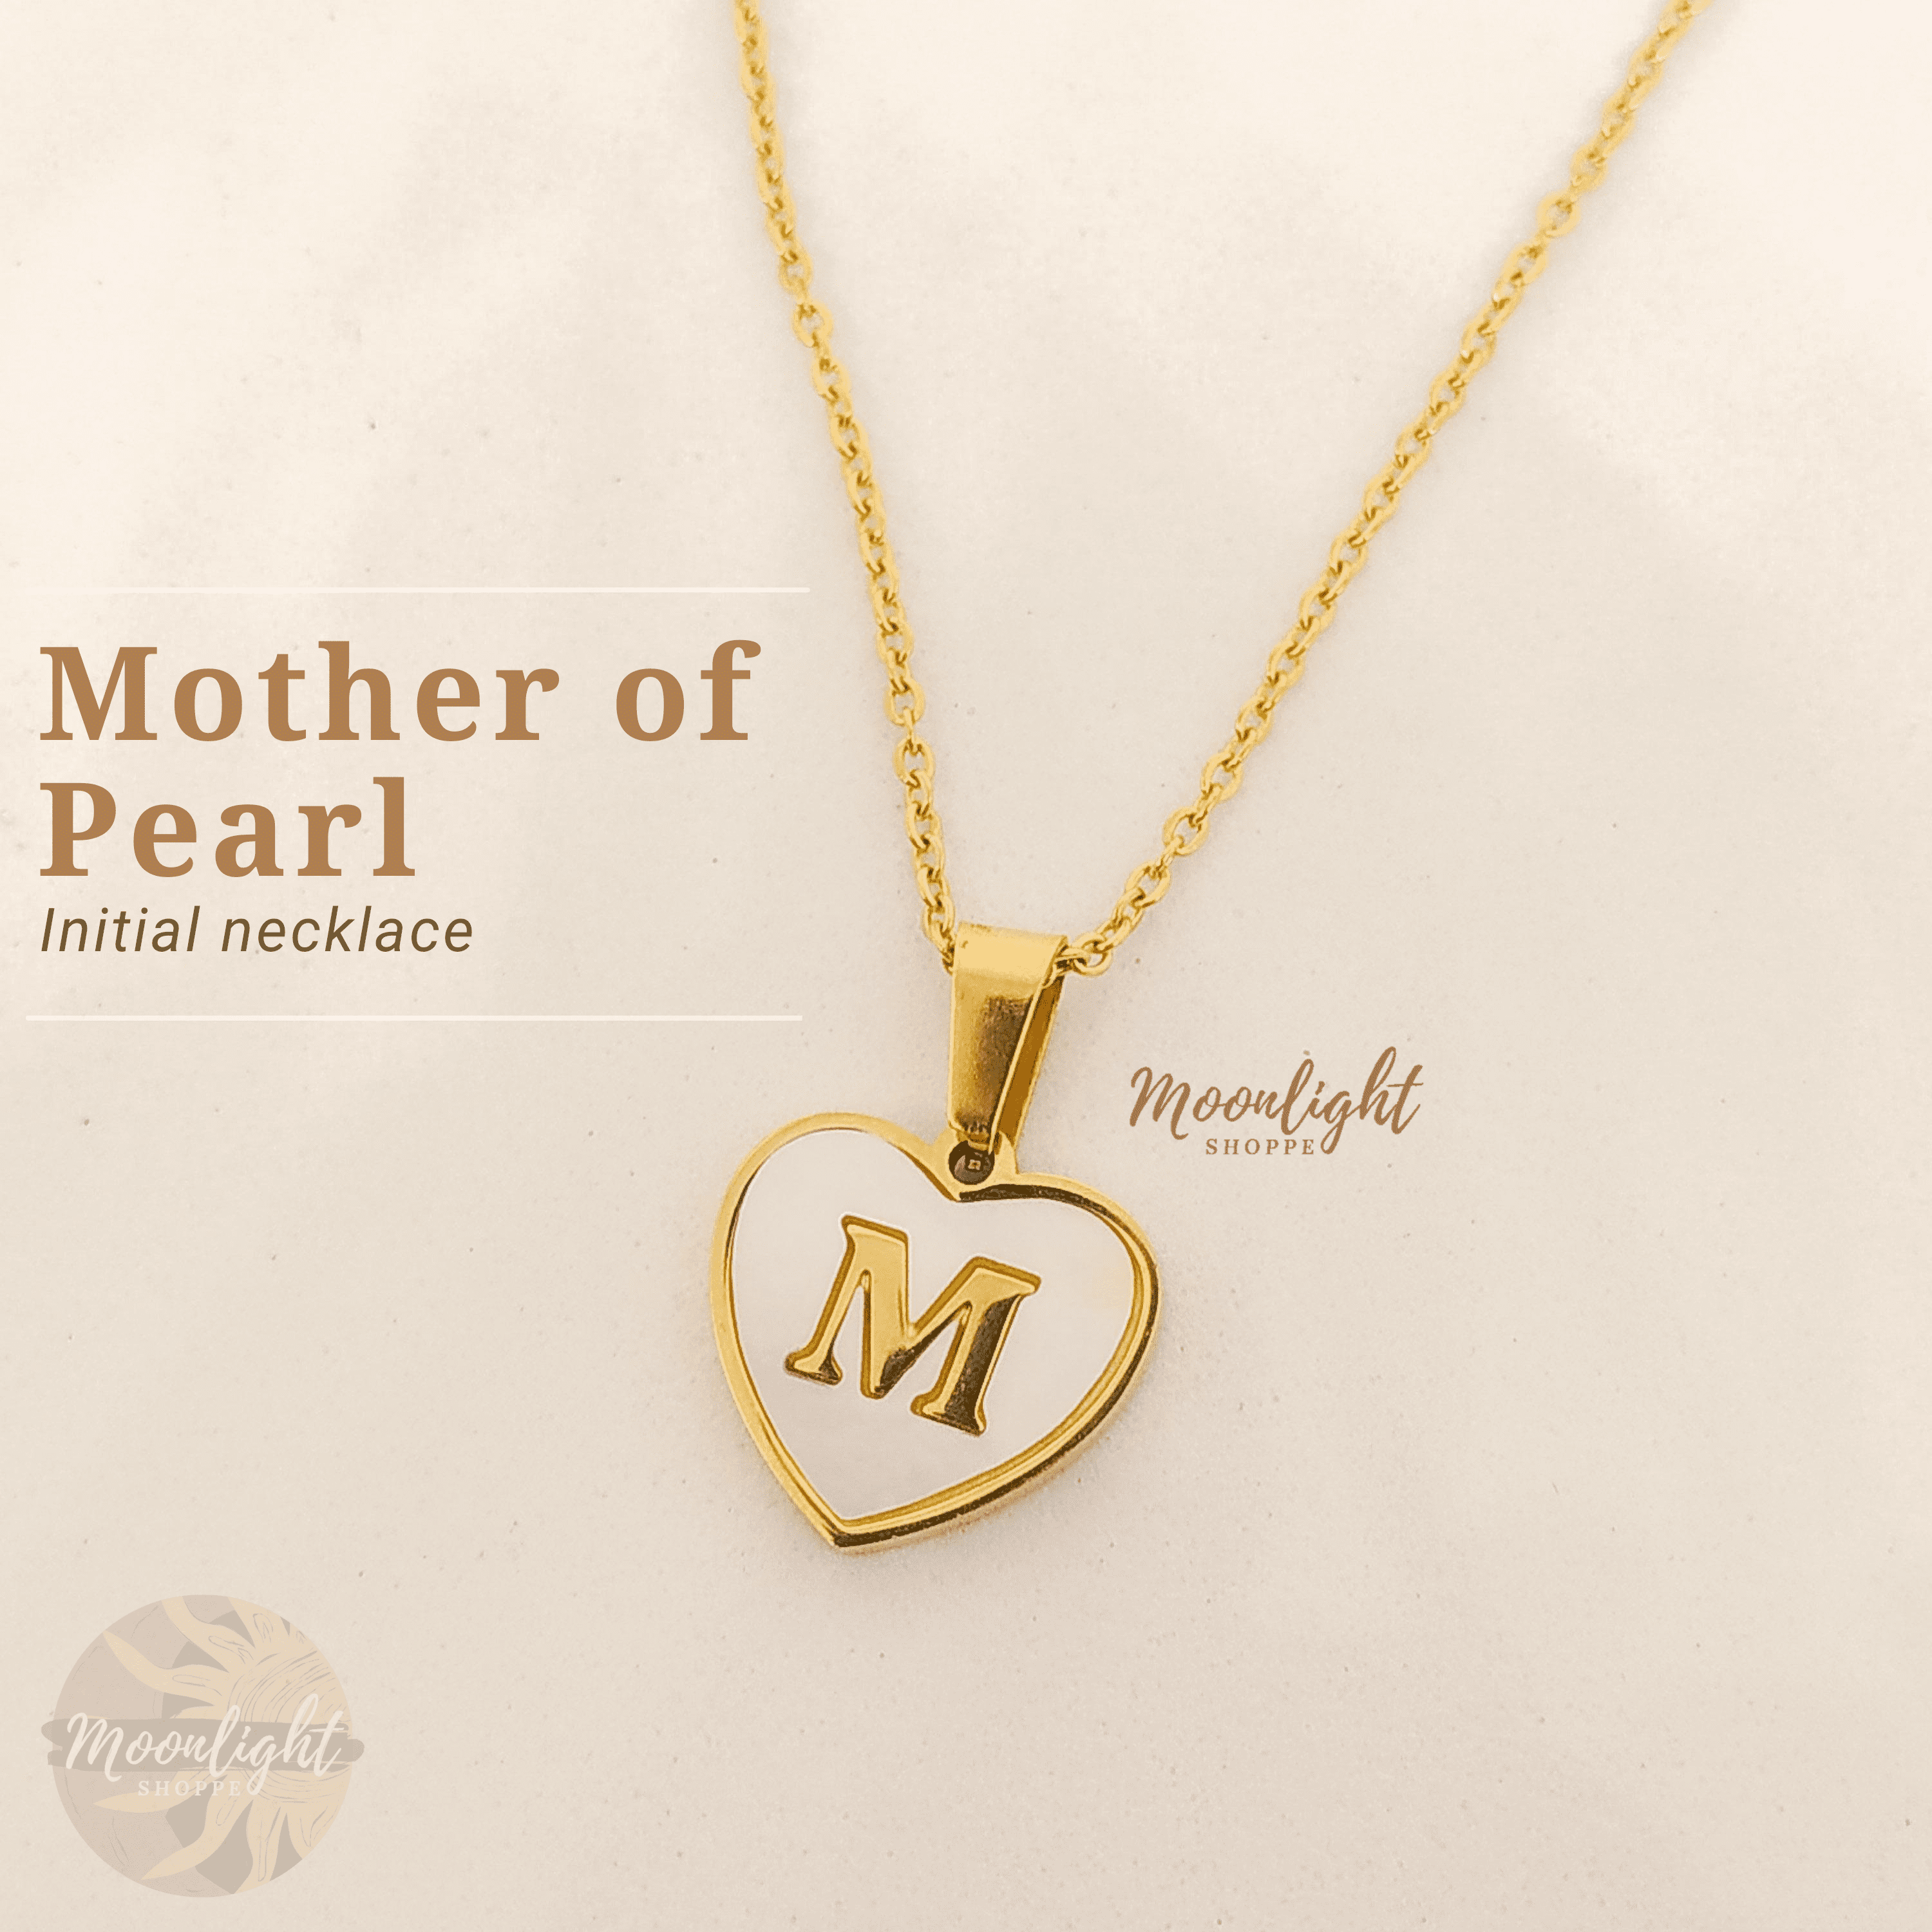 Buy Personalized Birthday Gift for Her, Mother of Pearl Initial Necklace,  Alphabet Letter Pendant, Paper Clip Chain, Nickel Free Hypoallergenic  Online in India - Etsy